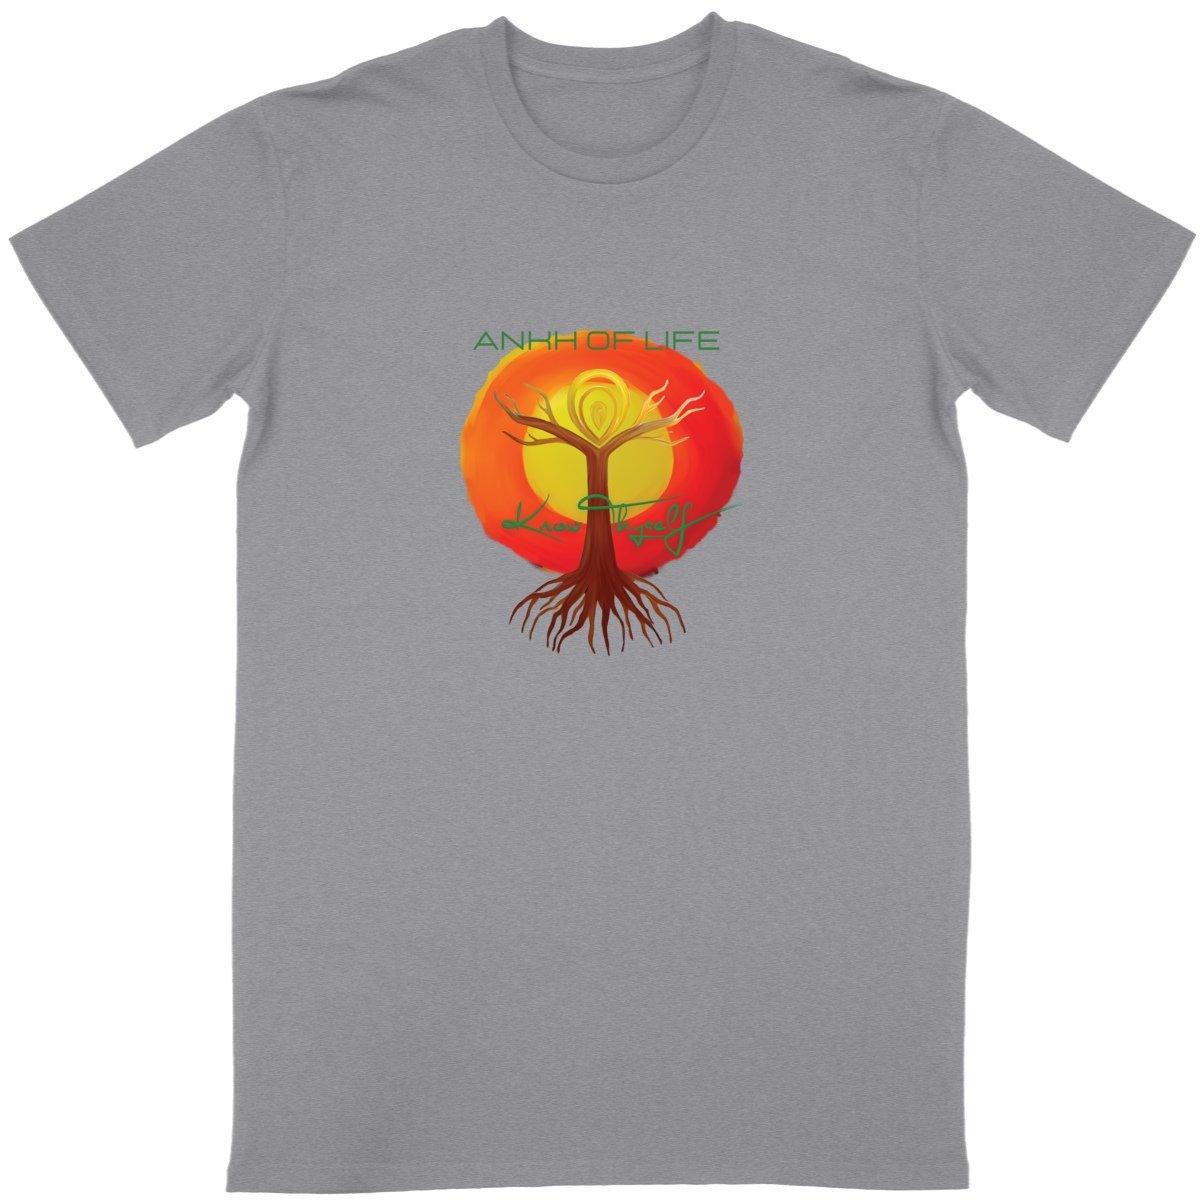 Know Thyself Ankh of Life Premium 100% organic cotton unisex T-shirt, designed by Tree of Life Art, features iconic spiritual symbols for universal appeal.